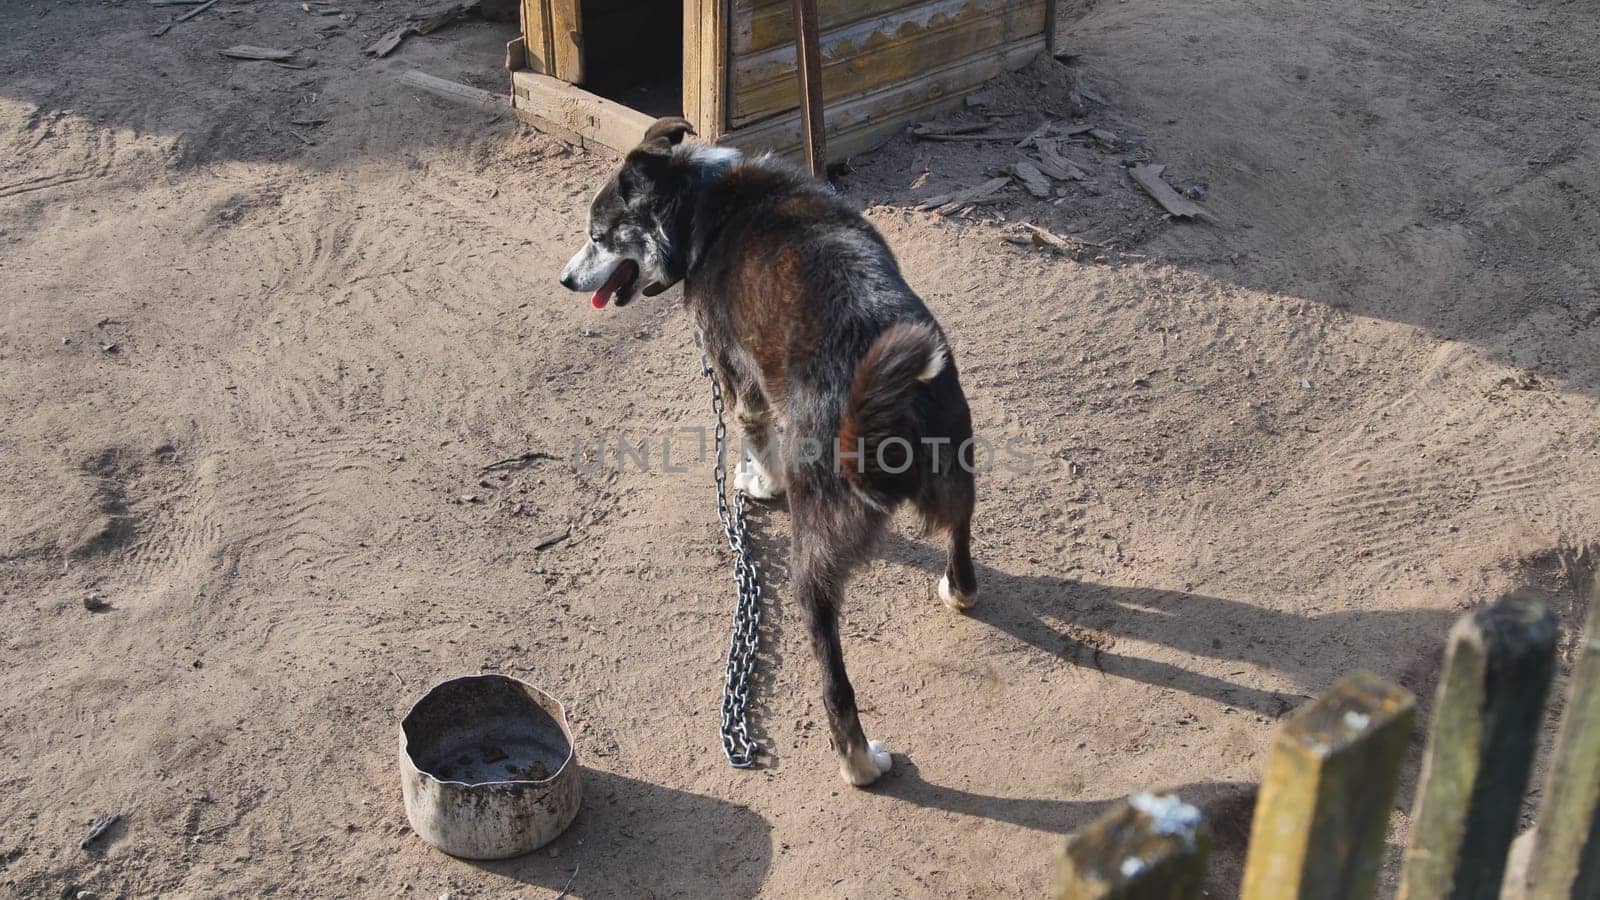 A country dog on a chain. by DovidPro